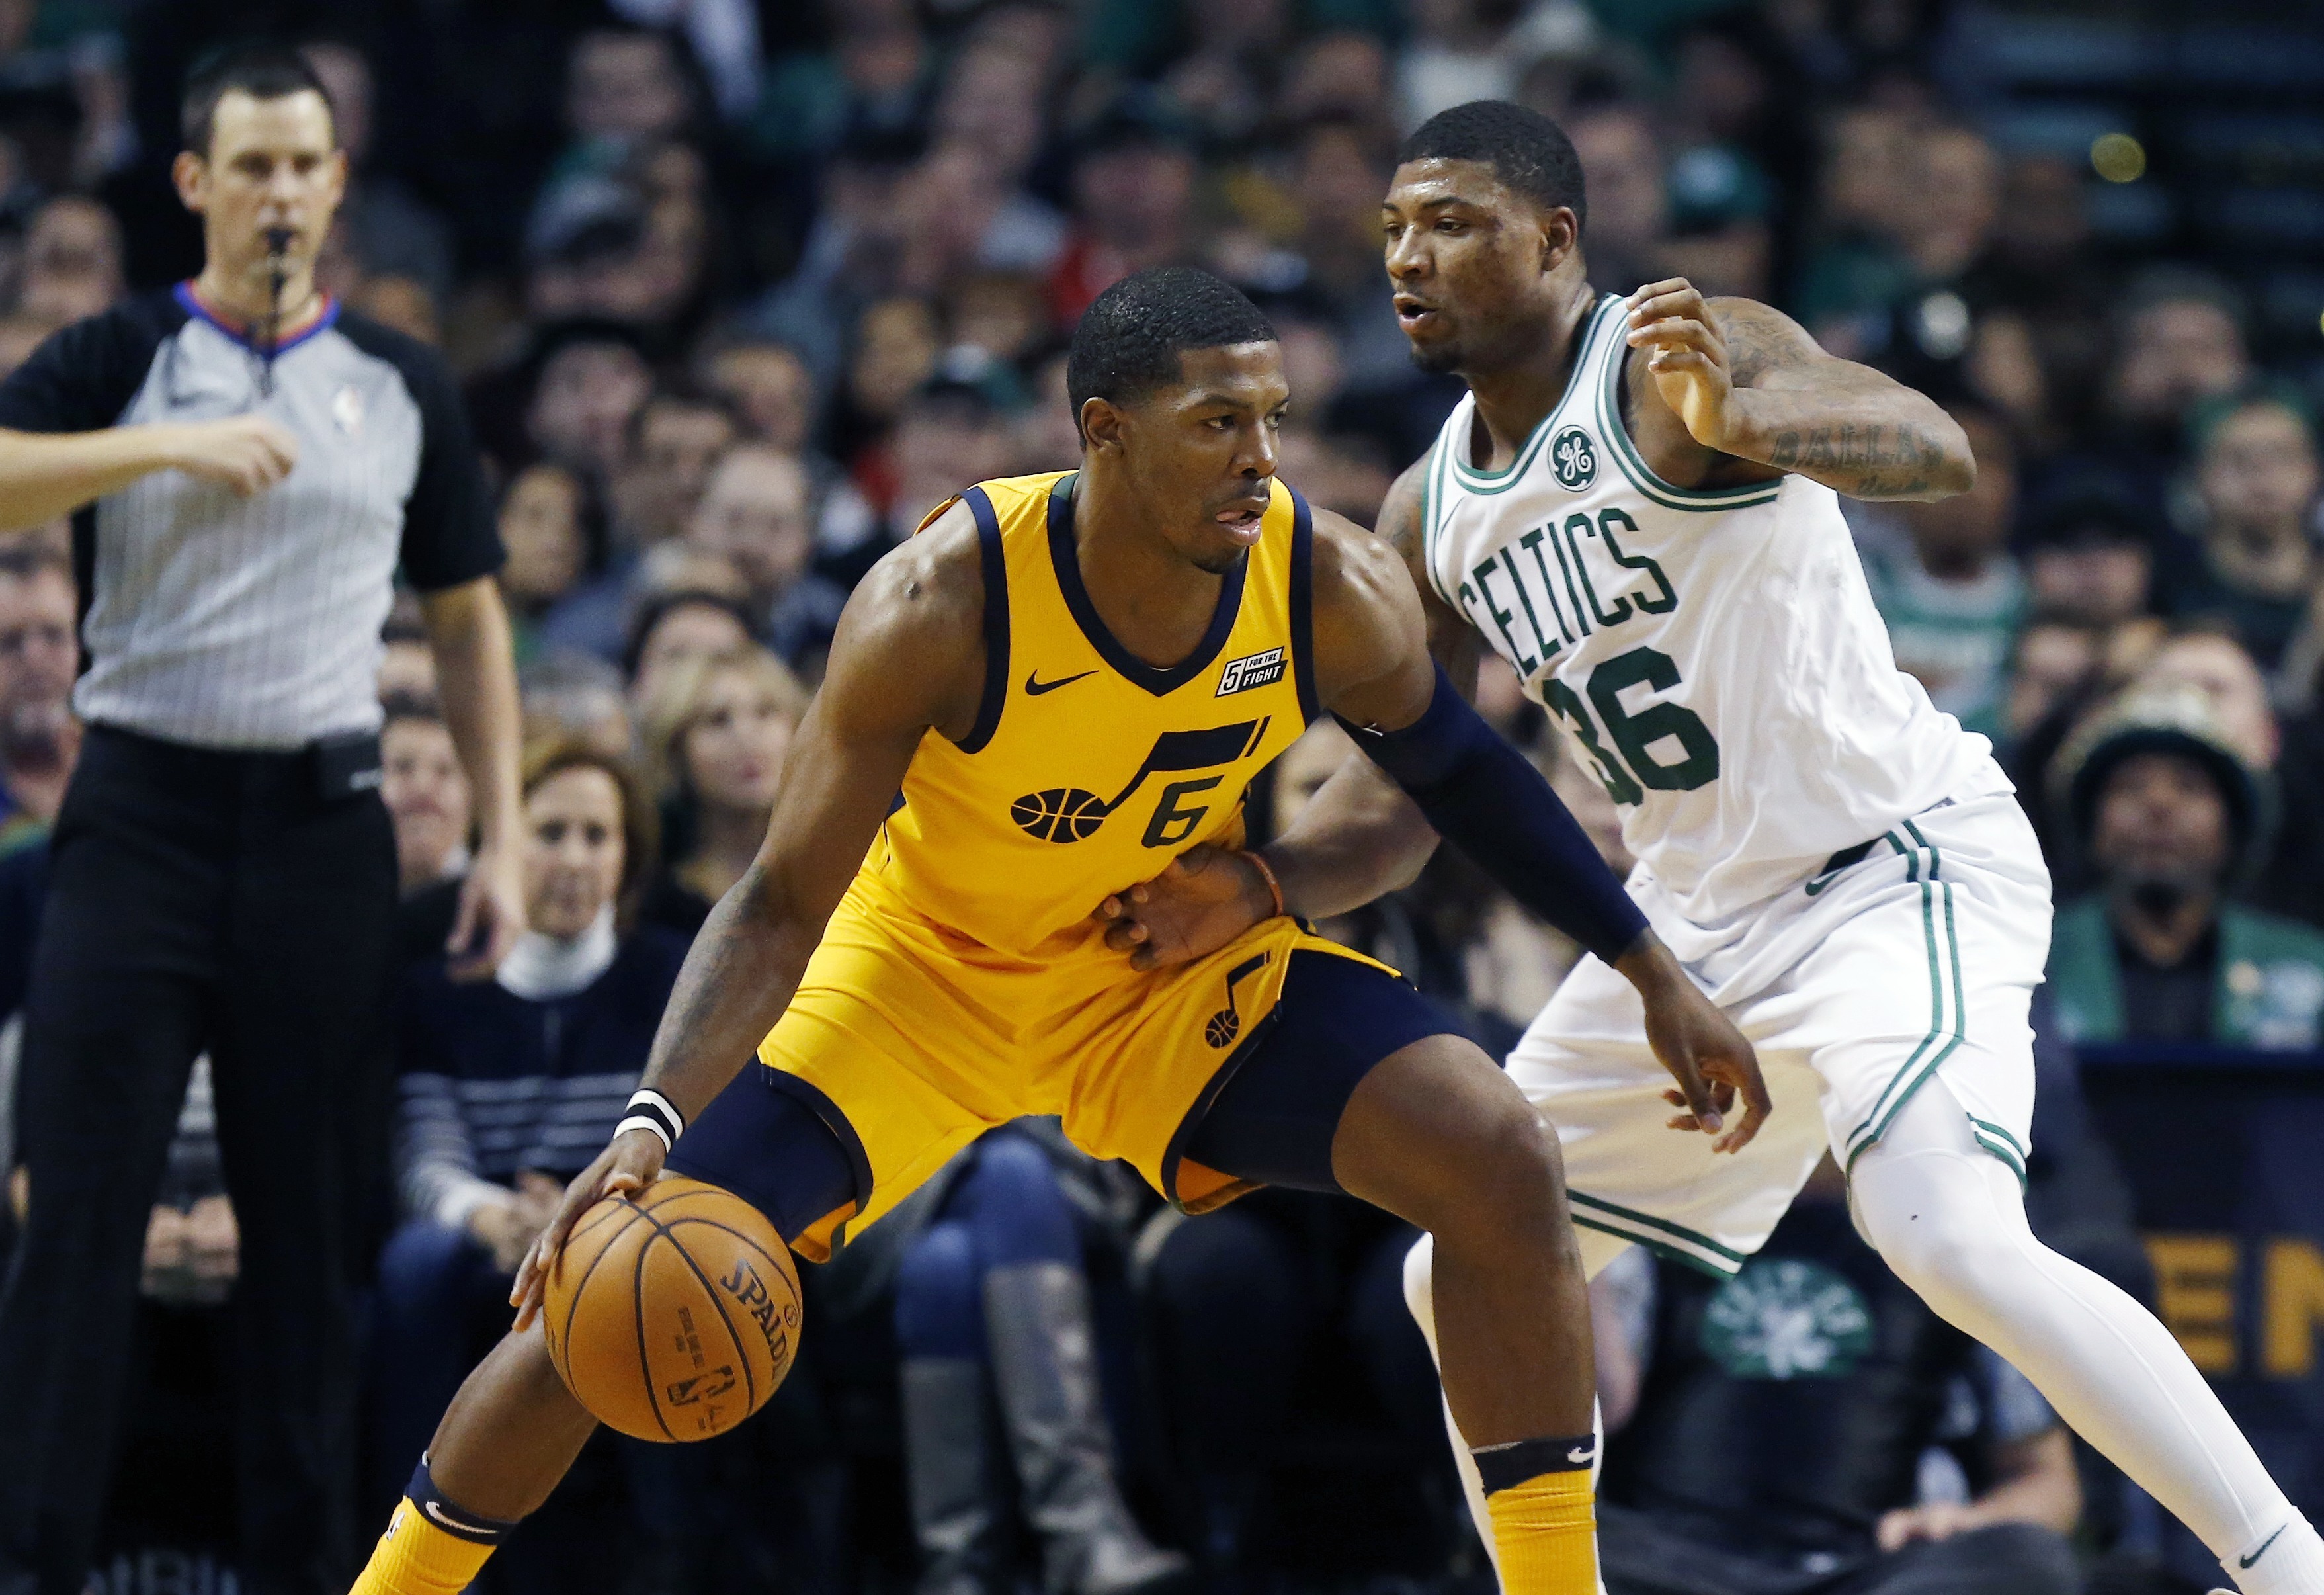 Joe Johnson signs with Celtics, scores for first time since 2018